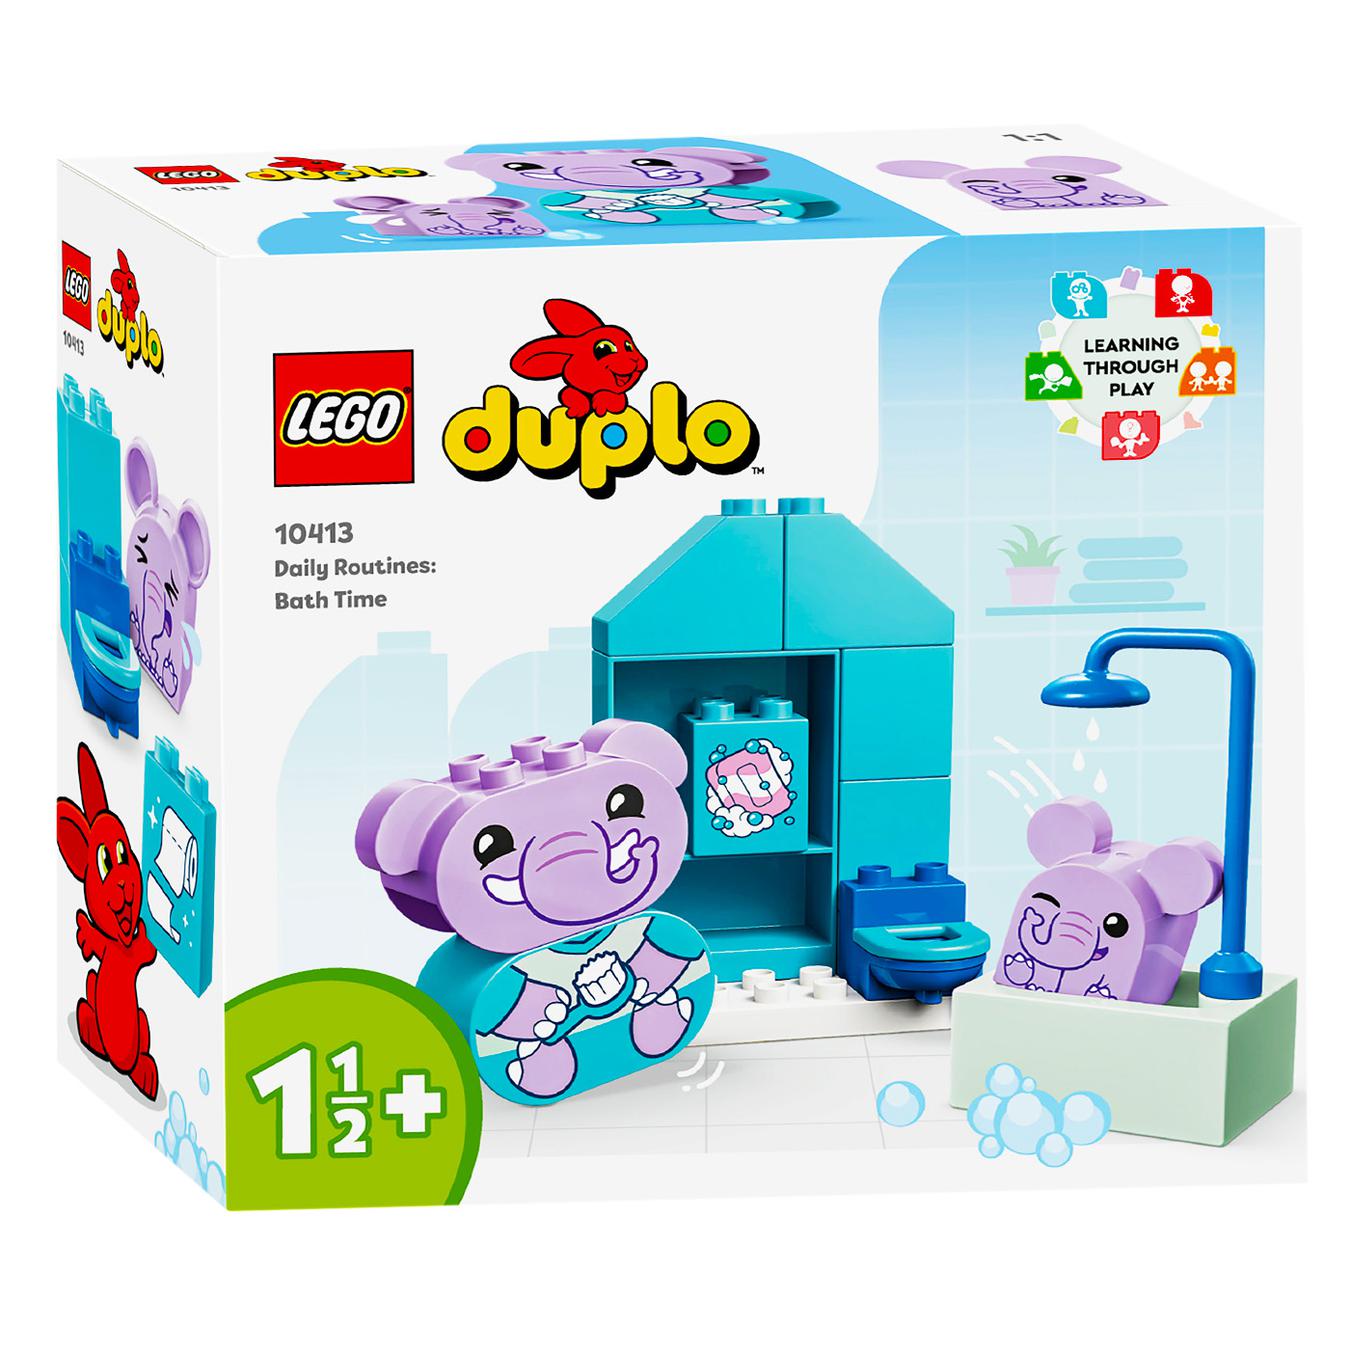 Constructor LEGO Duplo 10413 Daily routines: bath time